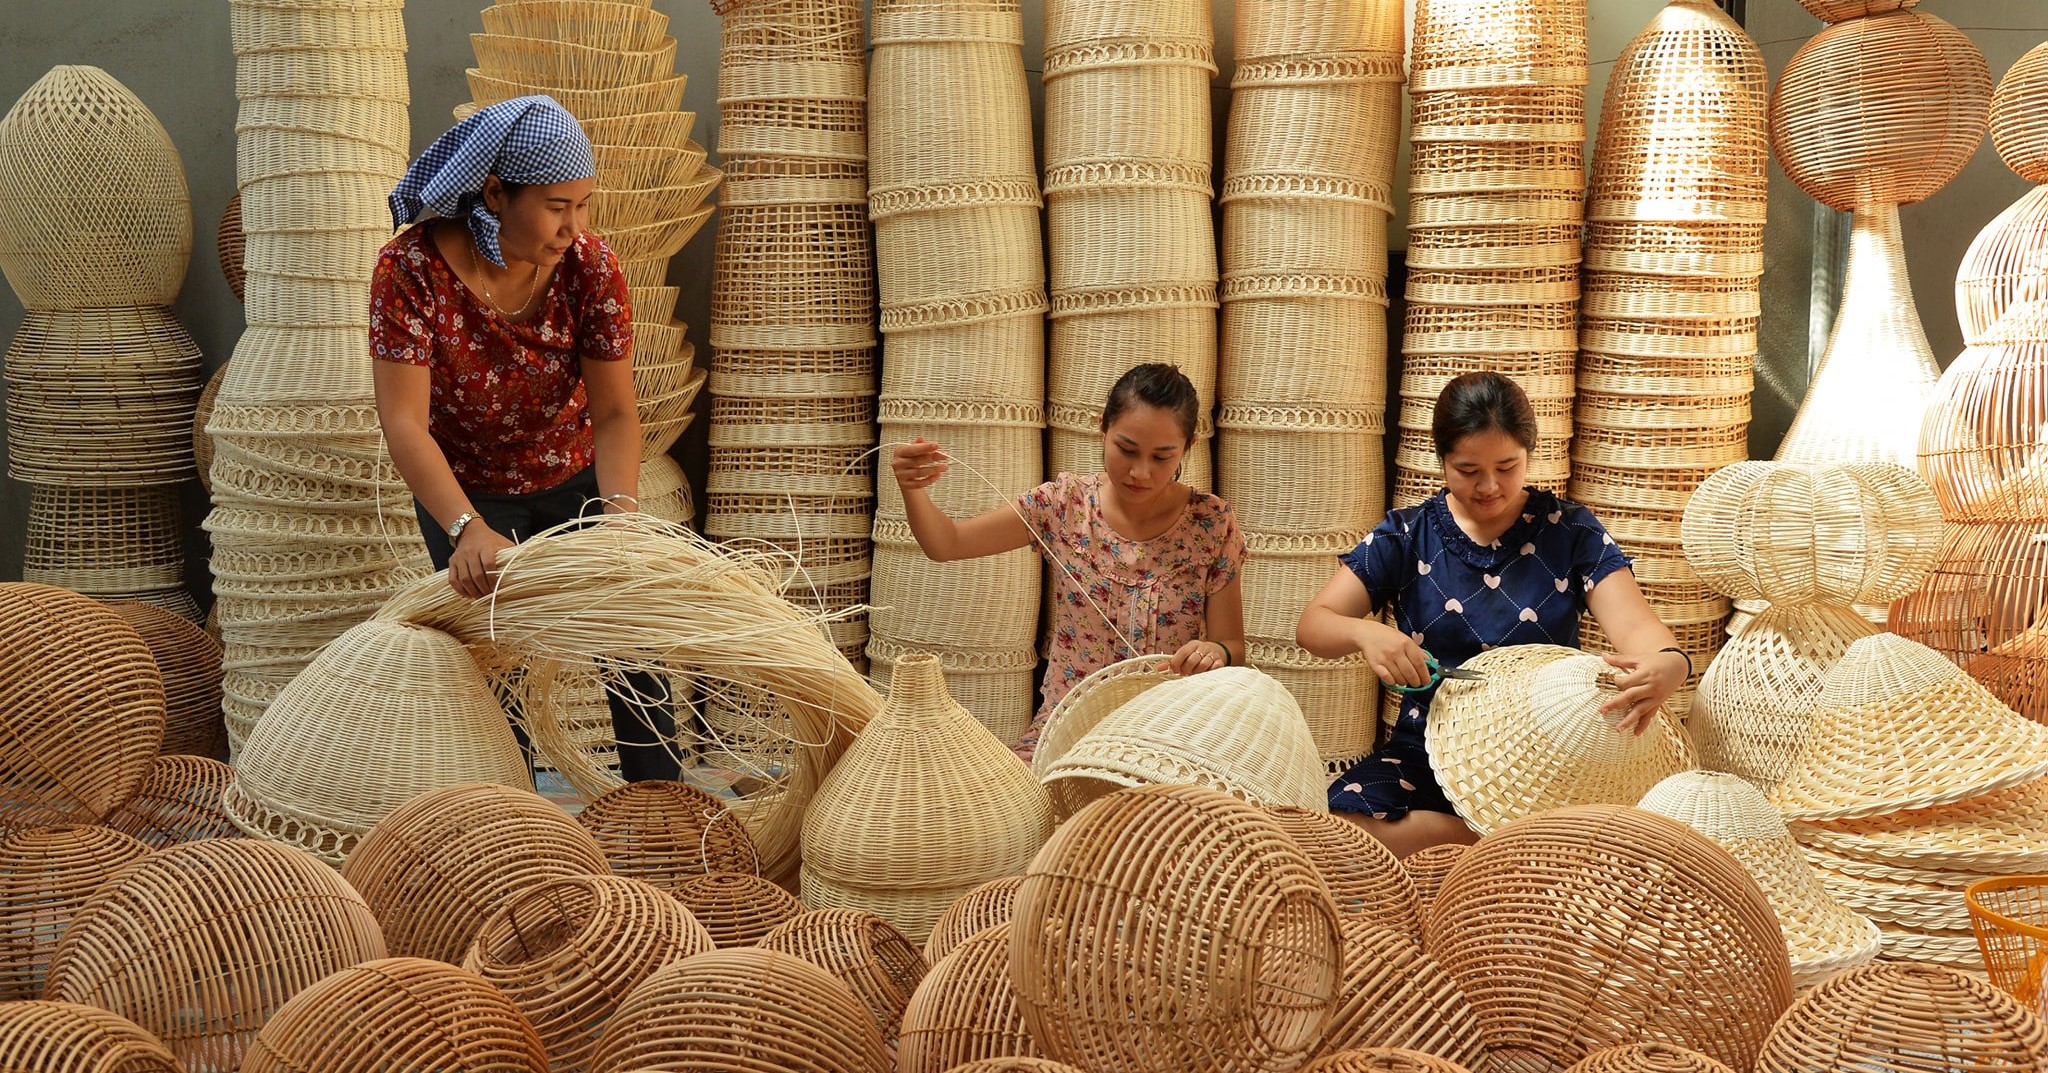 Export turnover of handicrafts in Vietnam expected to reach US$4 billion by 2025